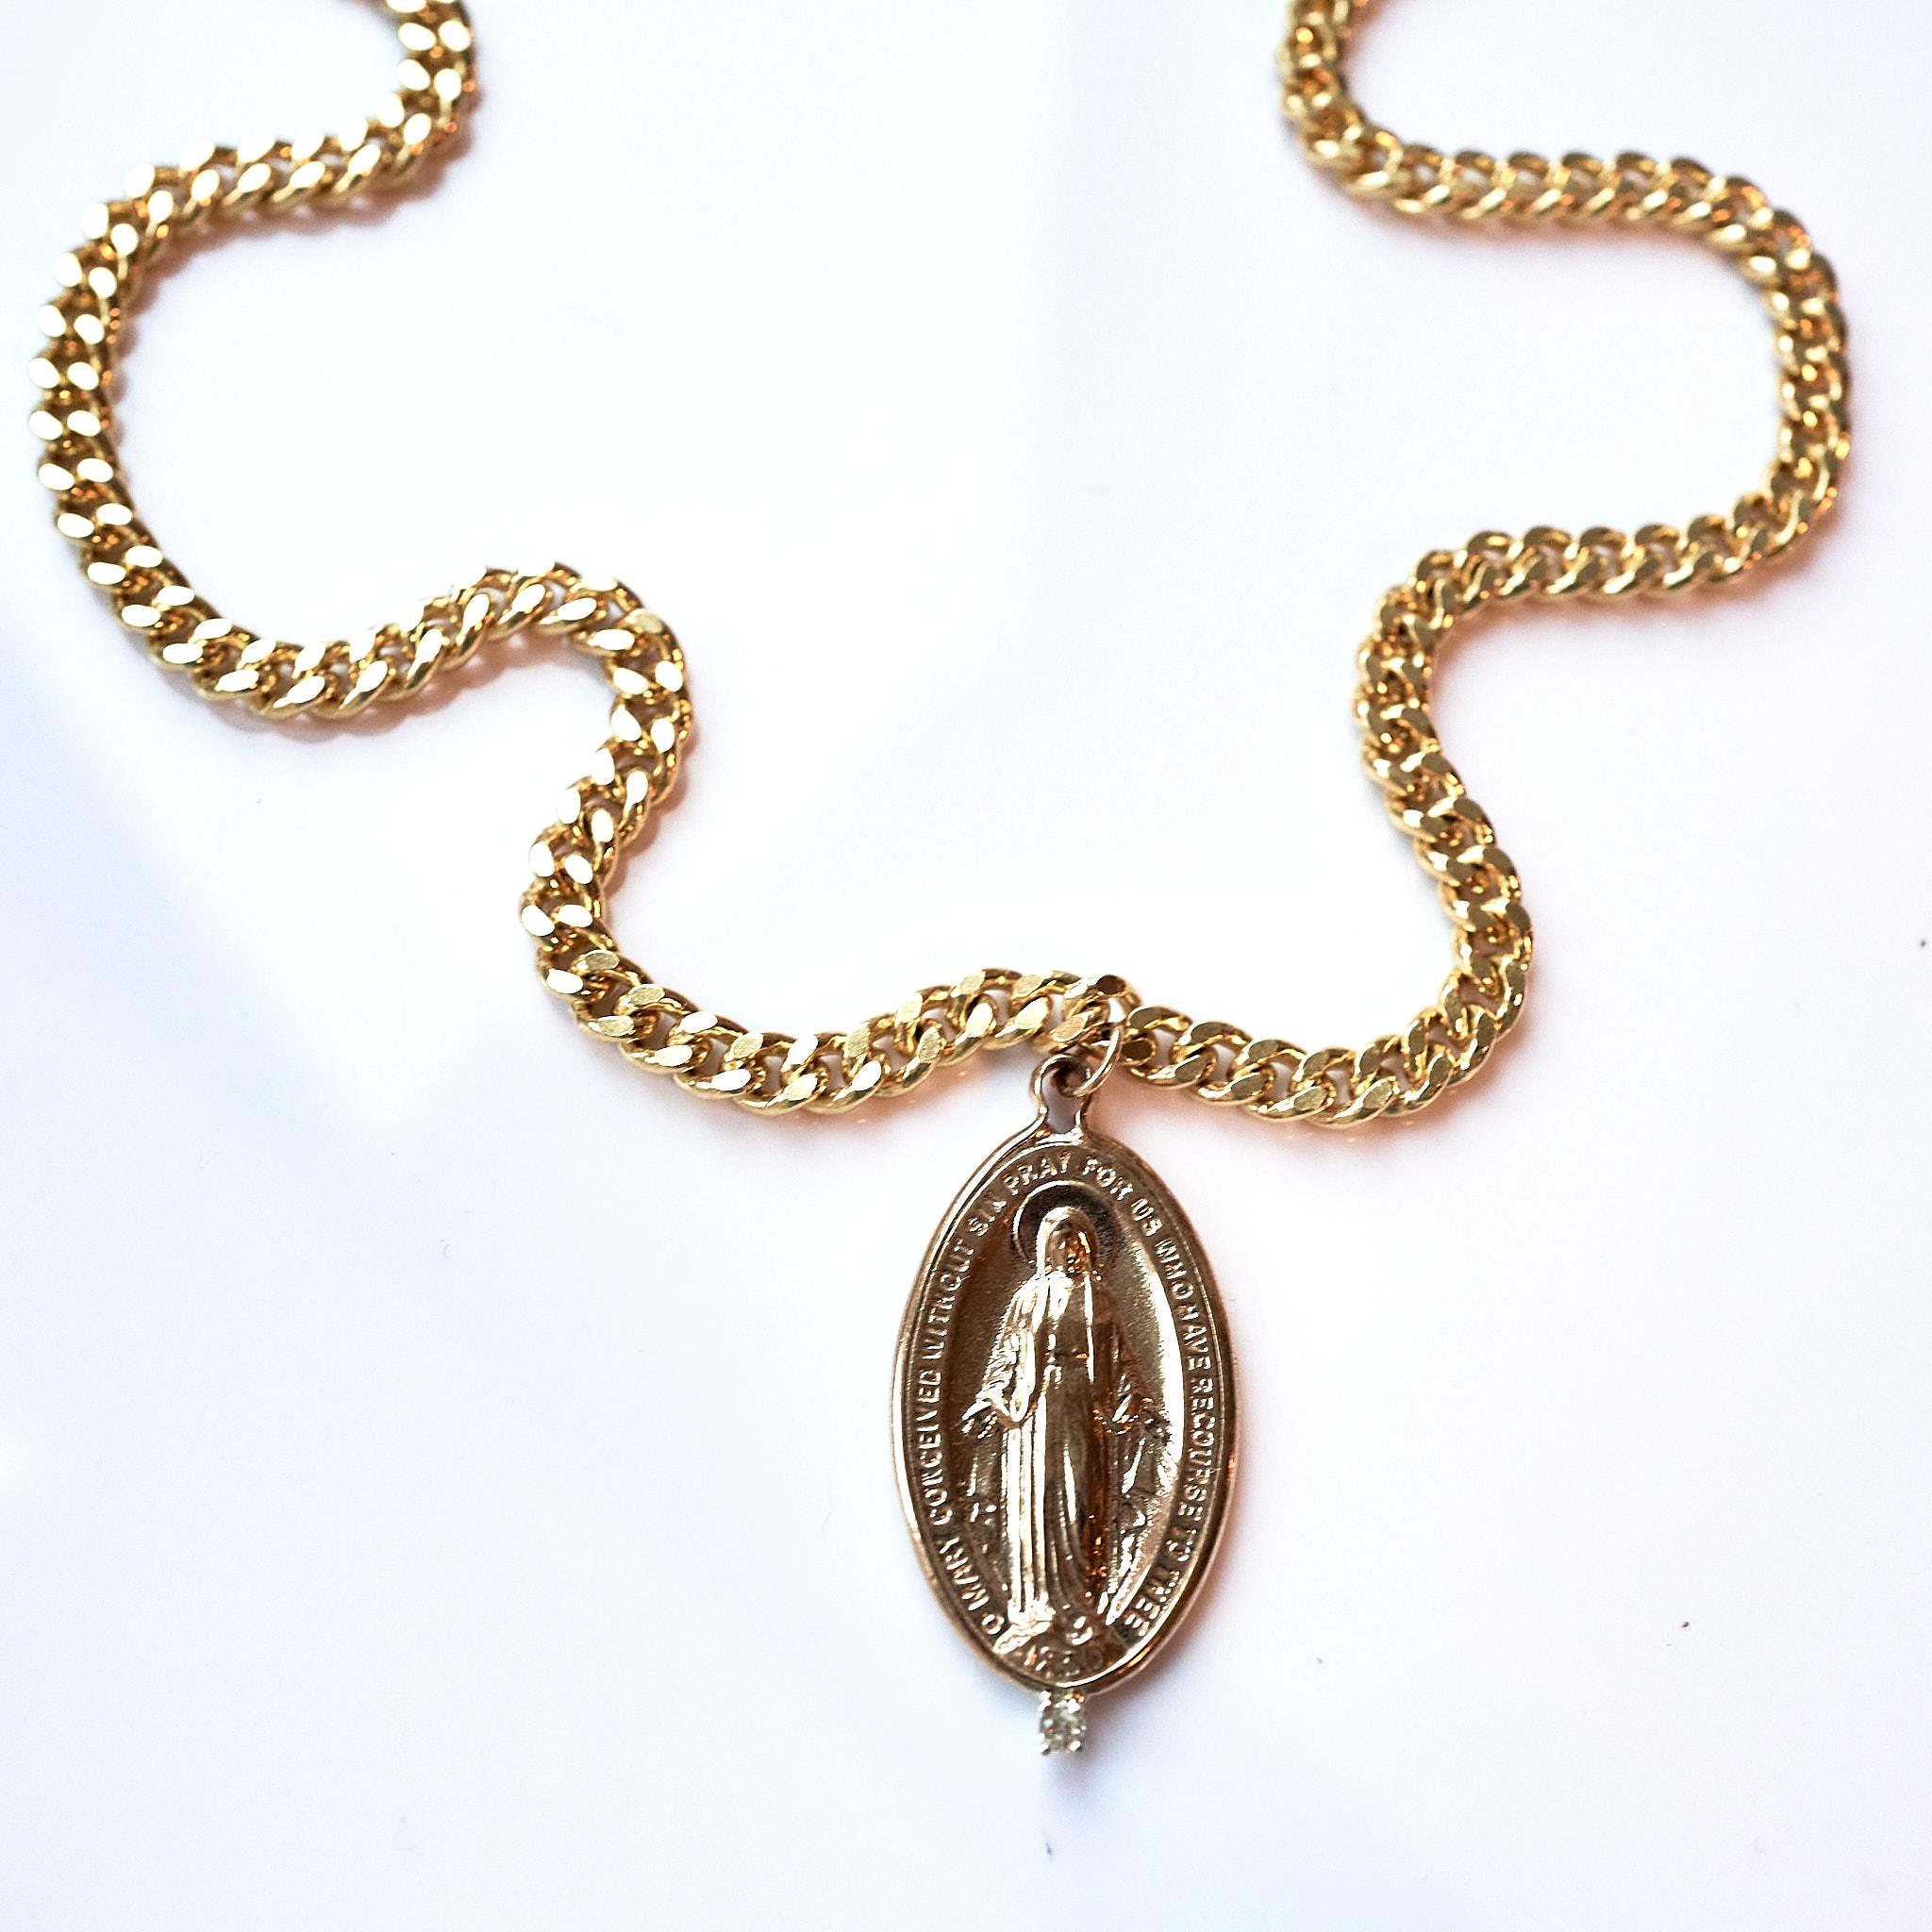 White Diamond Medal Virgin Mary Oval Medal Chain Necklace J Dauphin For Sale 1